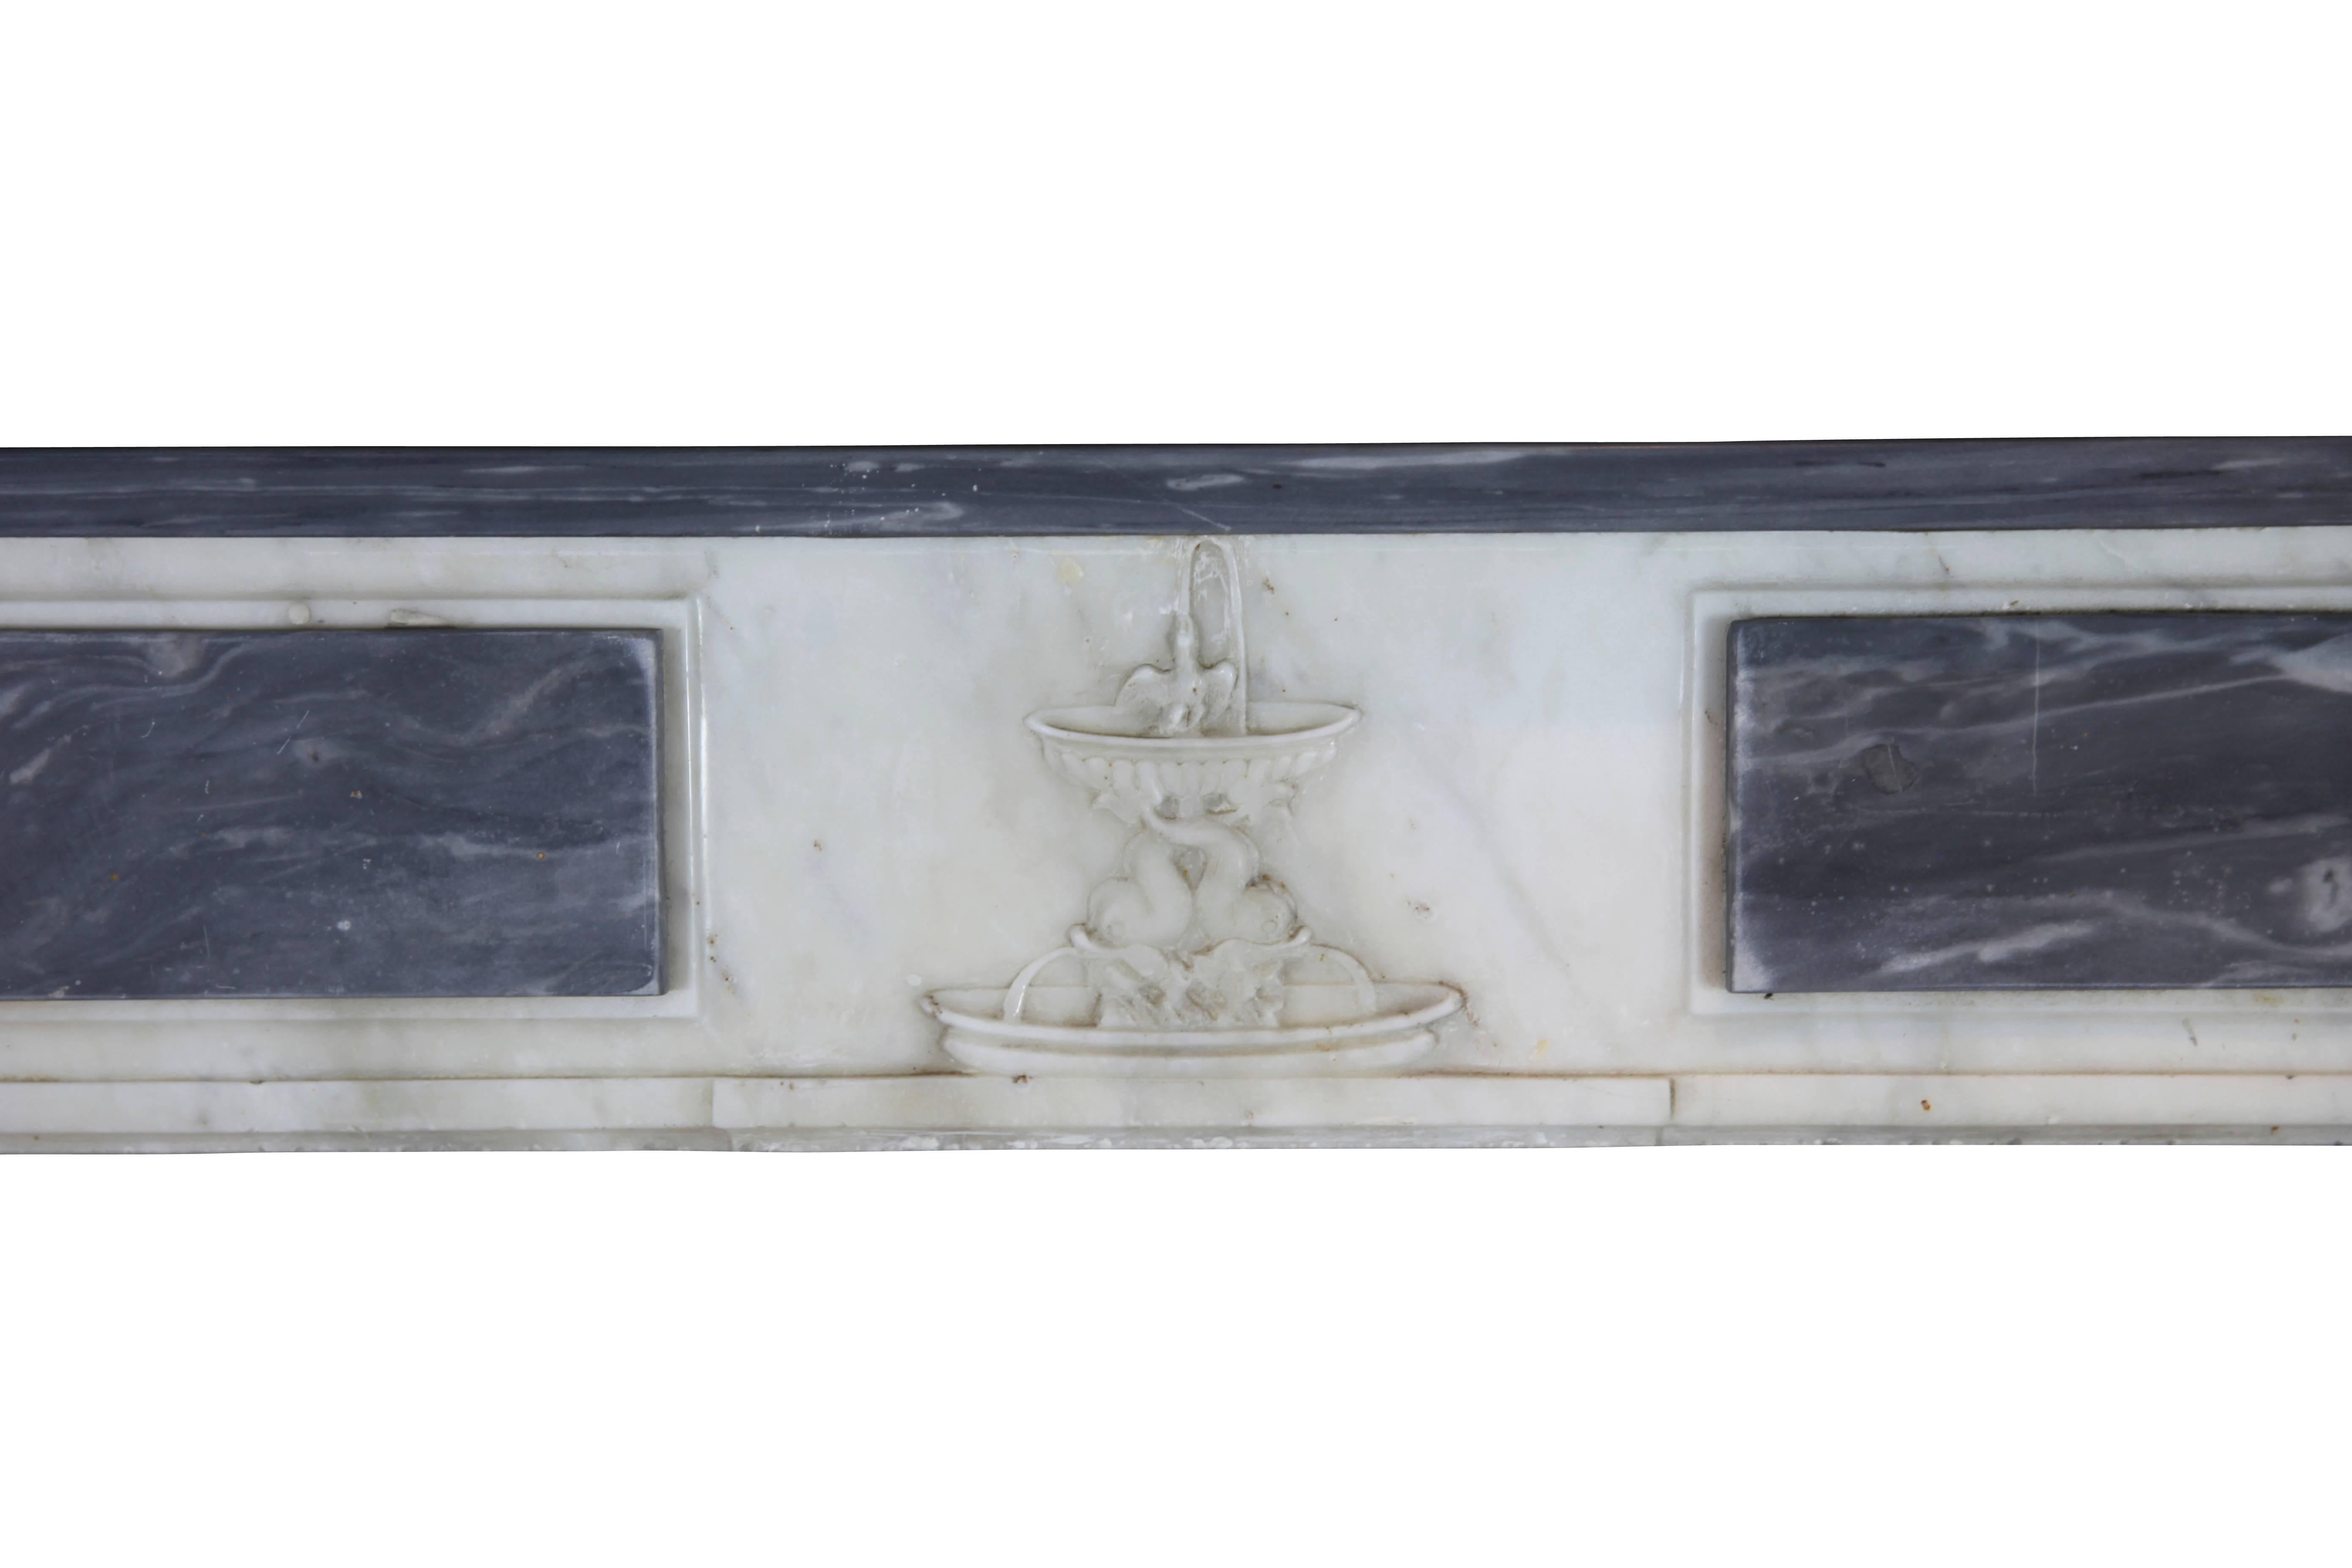 The fine original antique fireplace mantel is one of his kinds.
The combination of the Bleu Turquin marble with Blanc de Carrara marble is perfect.
The fine carving of the center piece which brings a fountain and the medallion on the extremes of